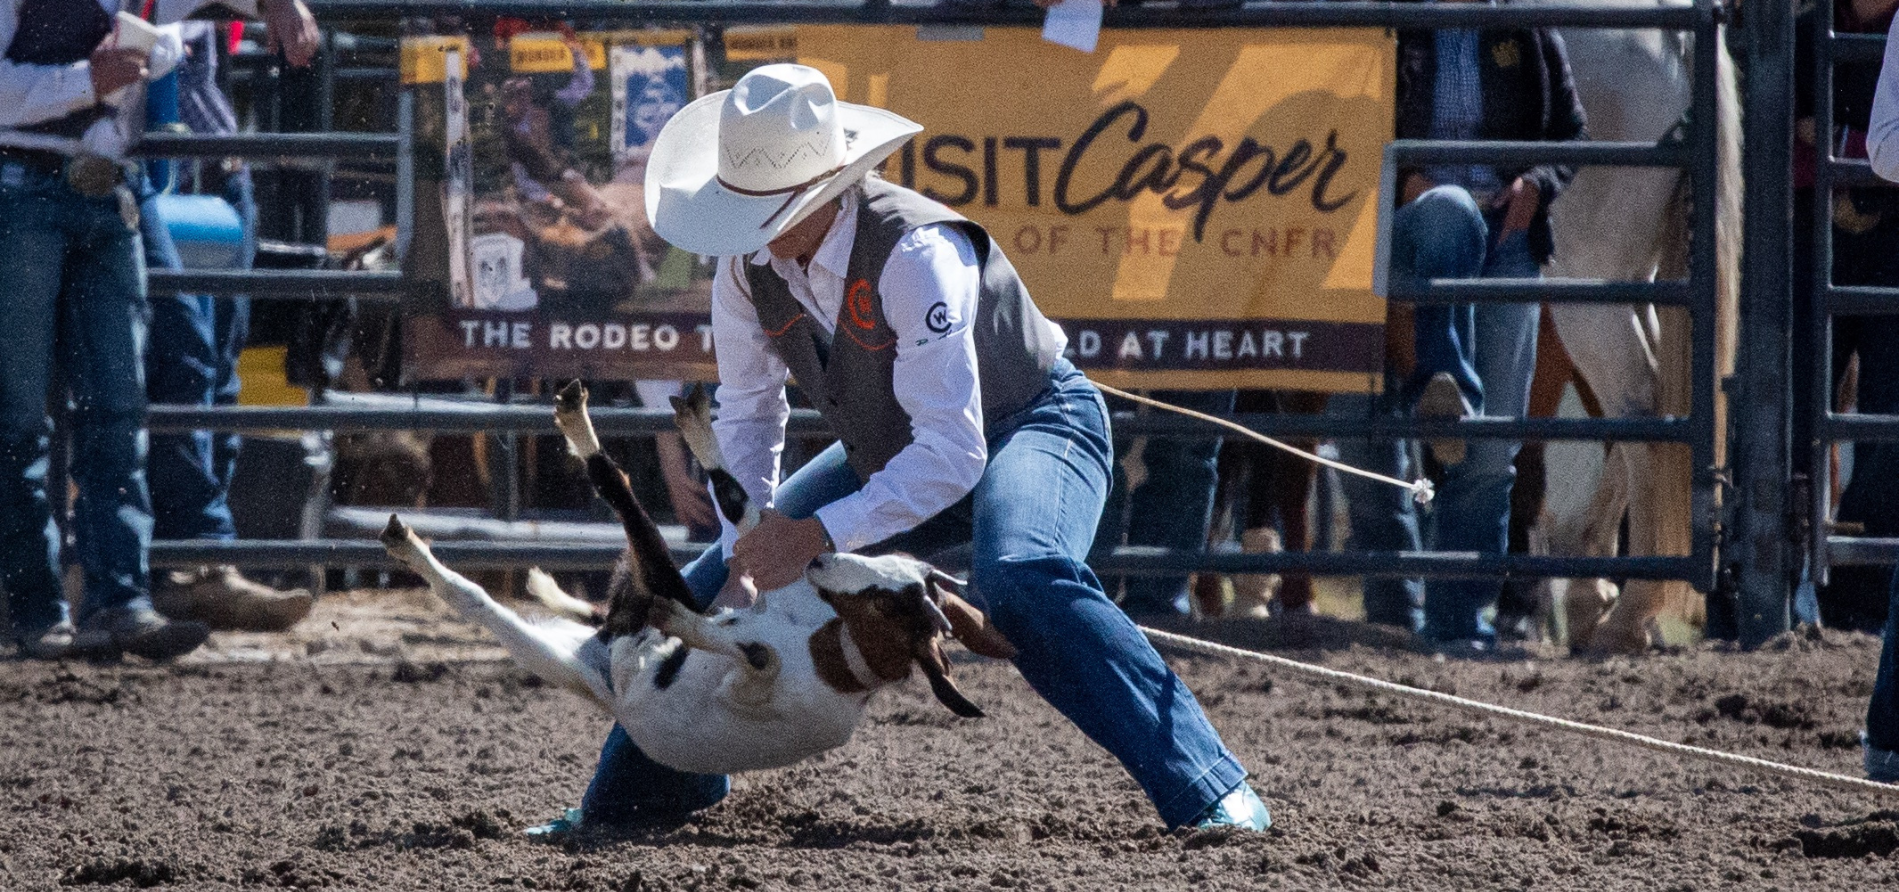 LCCC Rodeo Results